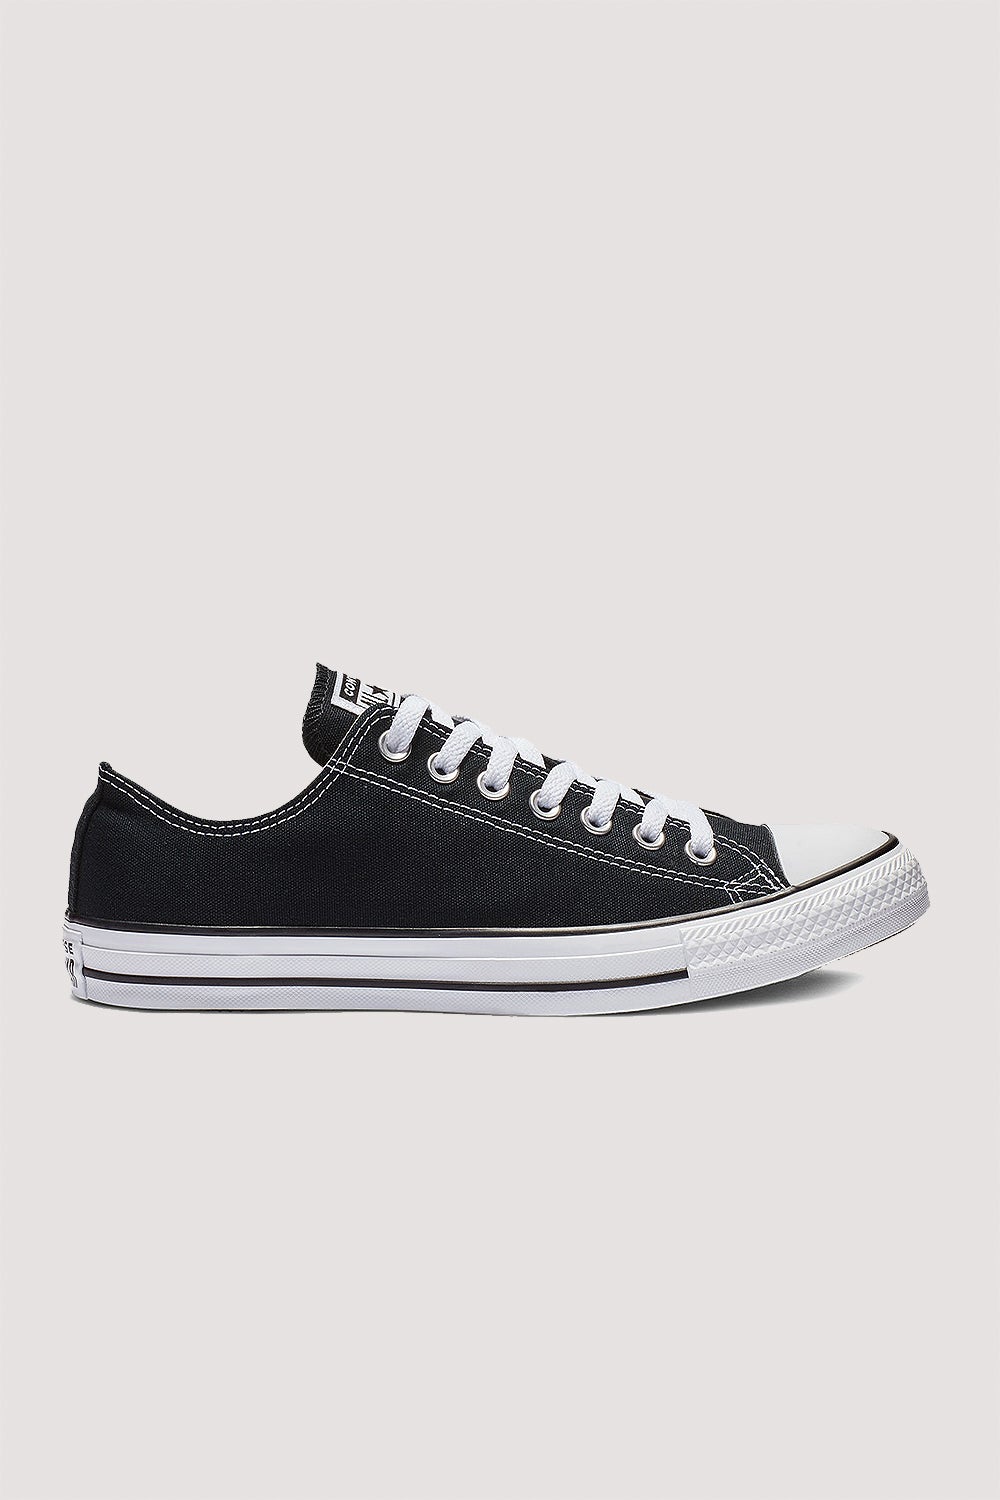 Chuck Taylor All Star Low Top Shoe | North Beach